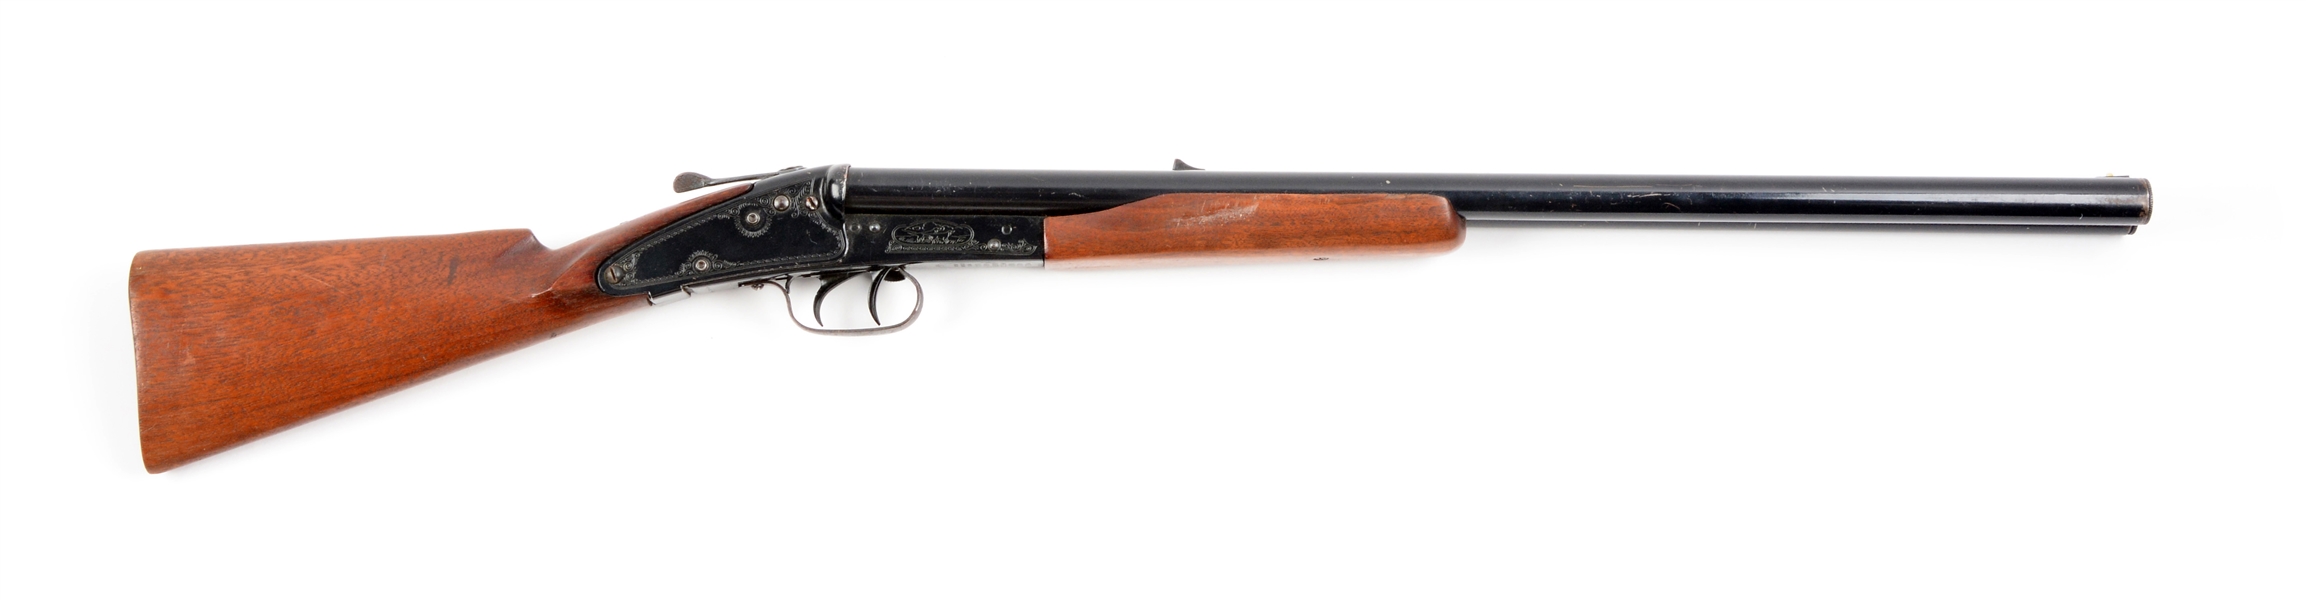 DAISY MODEL 21 SEARS SIDE BY SIDE AIR RIFLE.